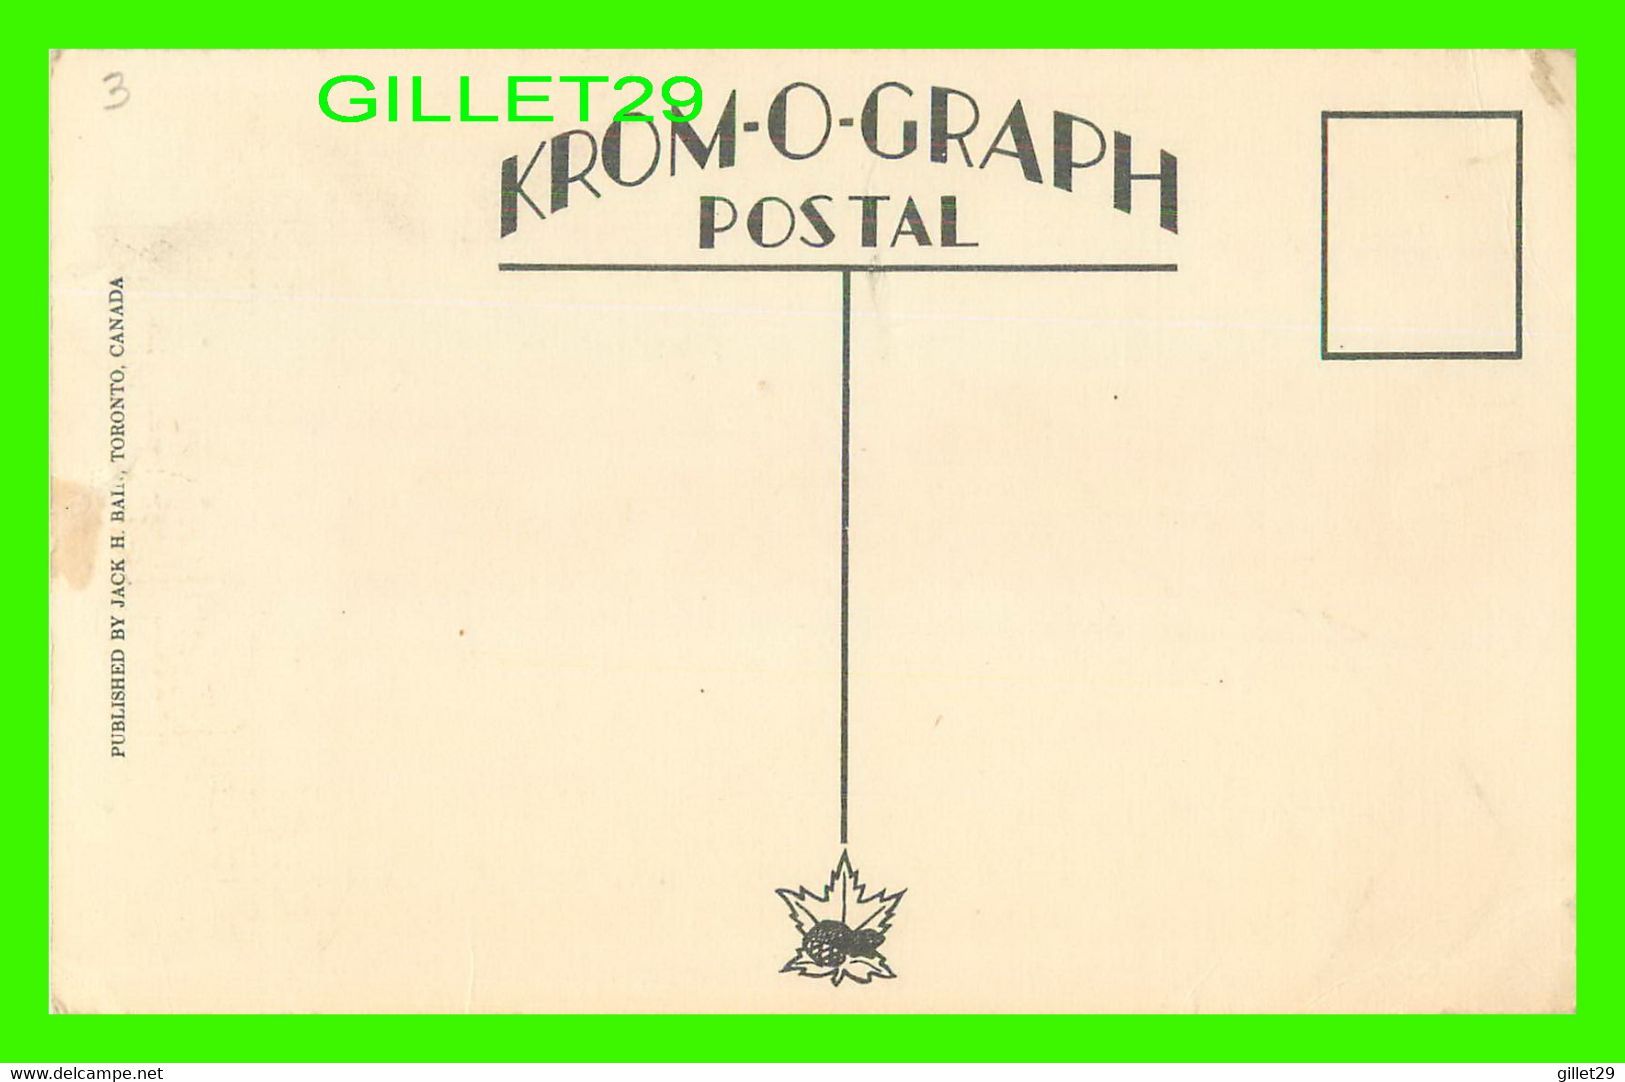 THOUSAND ISLANDS, ONTARIO - SHIP ON THE RIVER - KROM-O-GRAPH POSTAL - PUB. BY JACK H. BAIL - - Thousand Islands